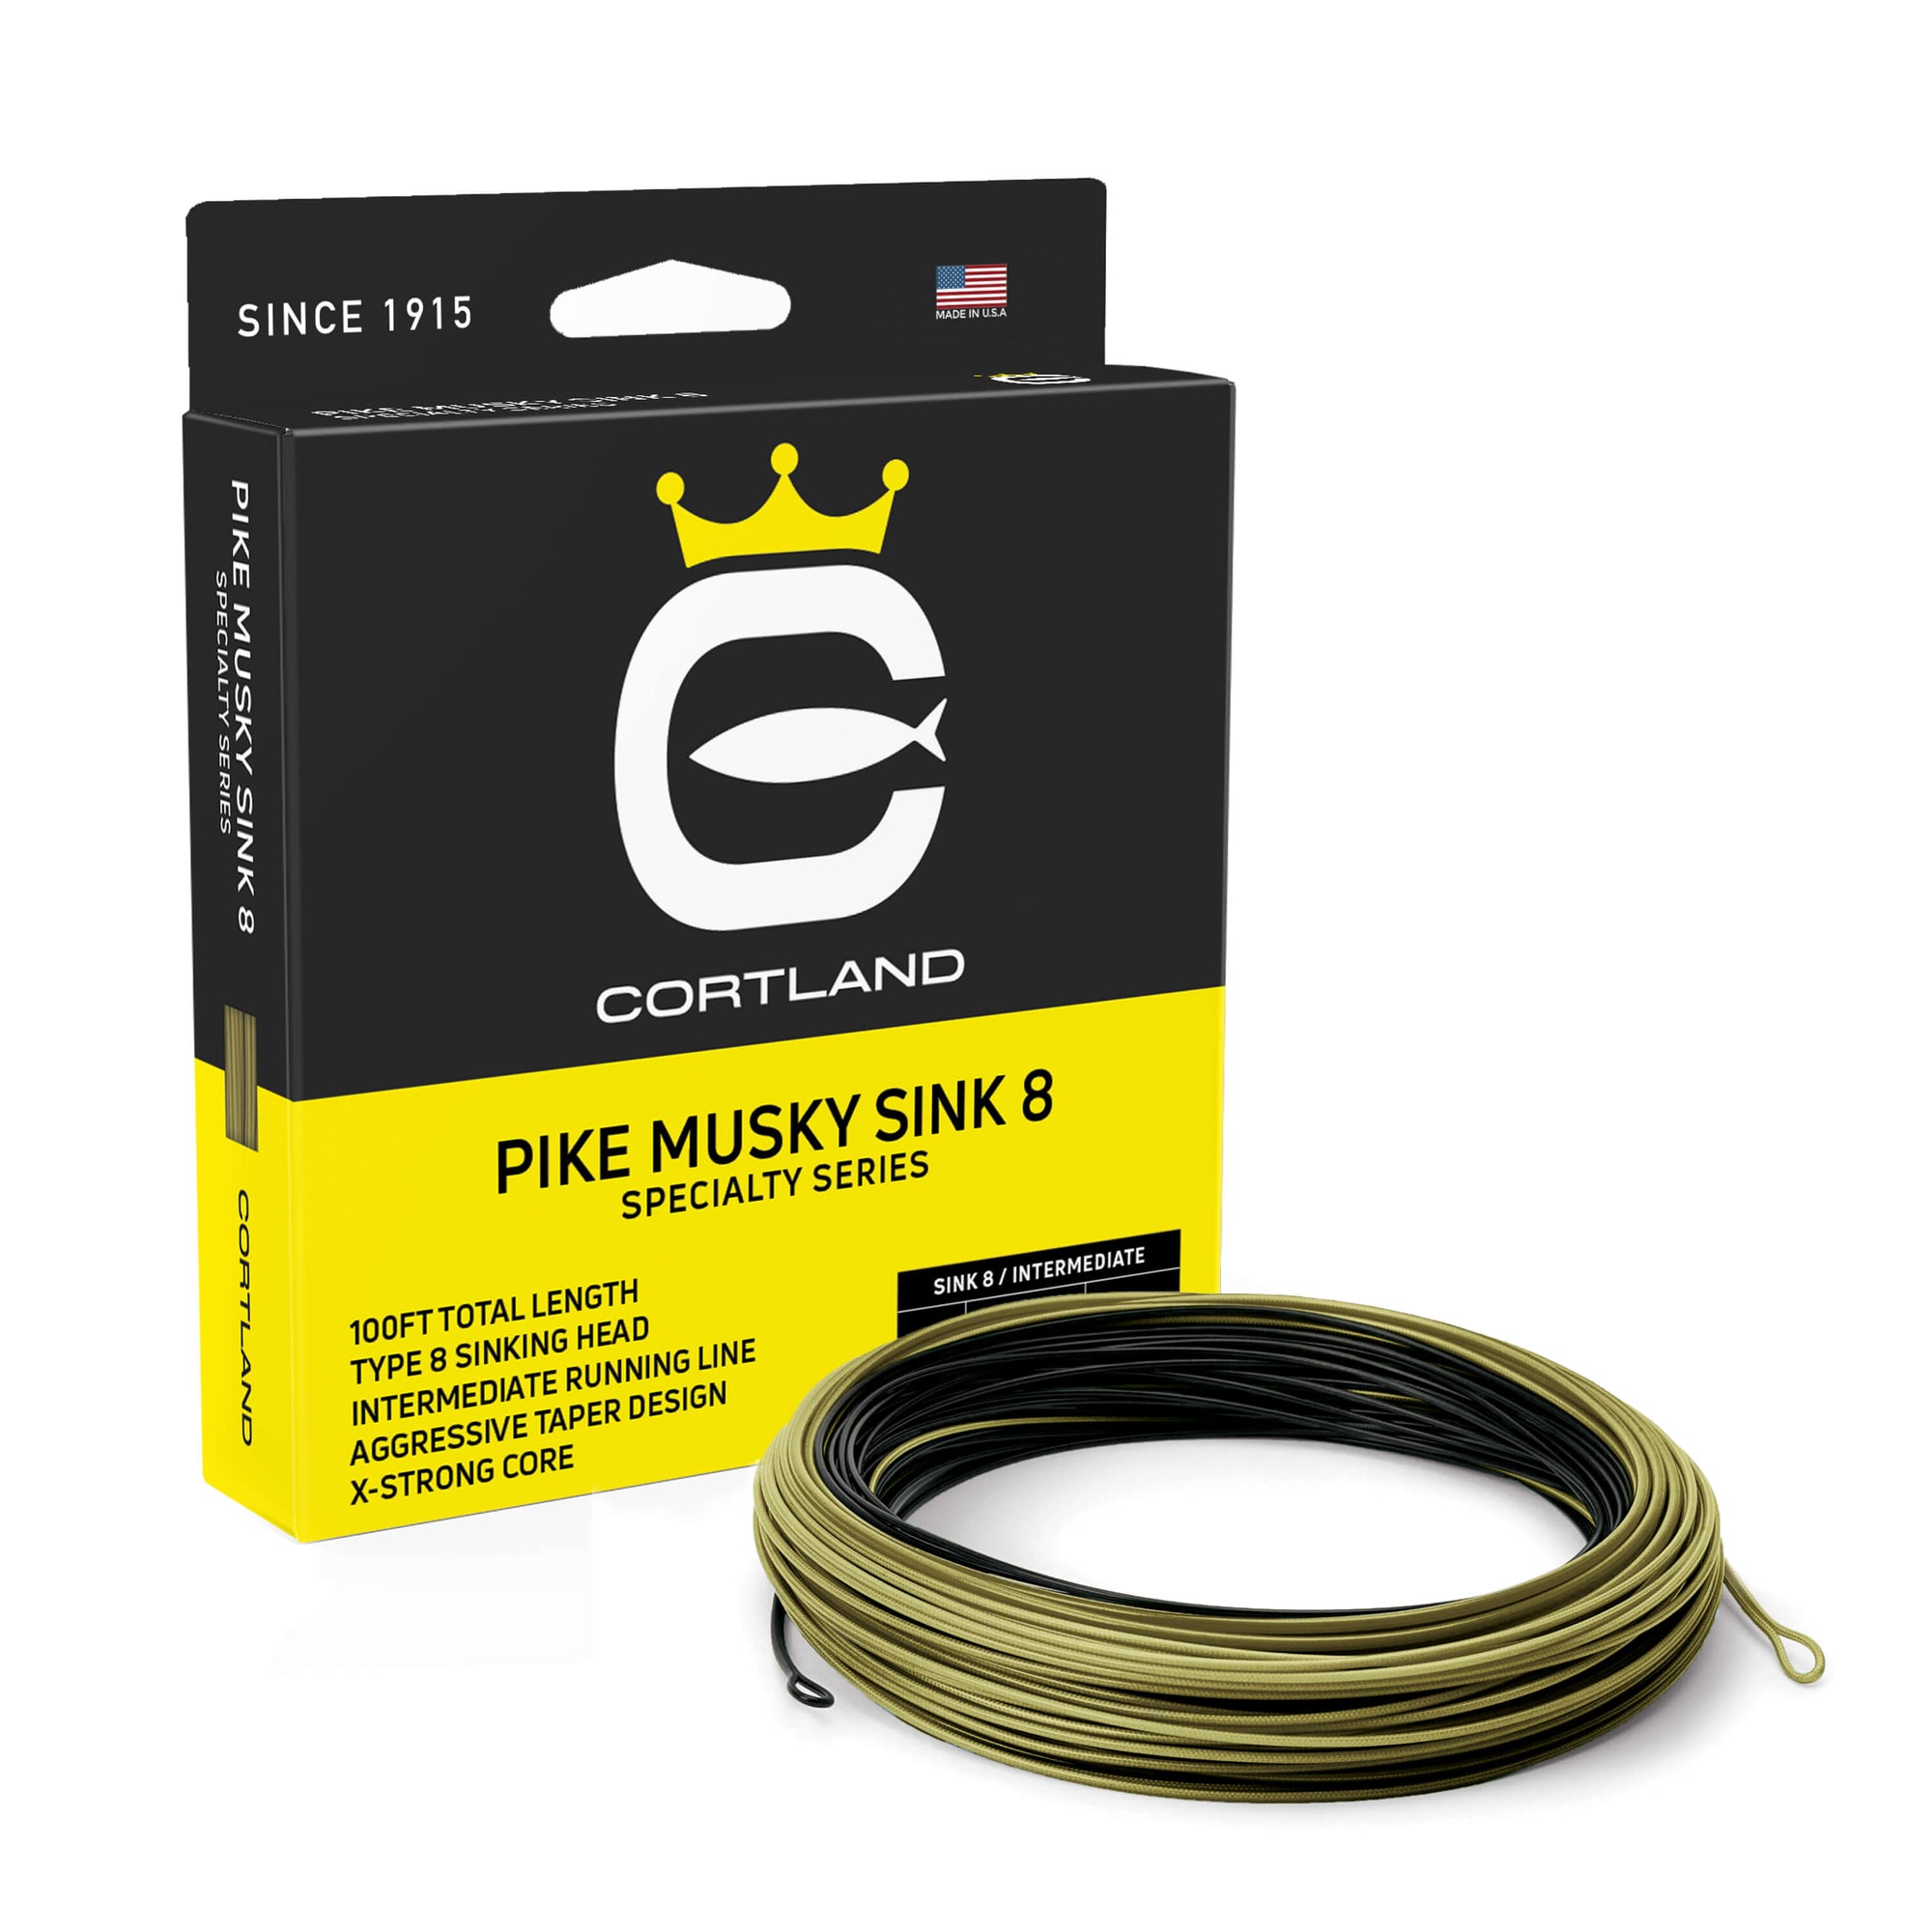 Pike Musky Sink 8 Fly Line and Box. The coil is black and olive. The box has the Cortland logo and is black and yellow.